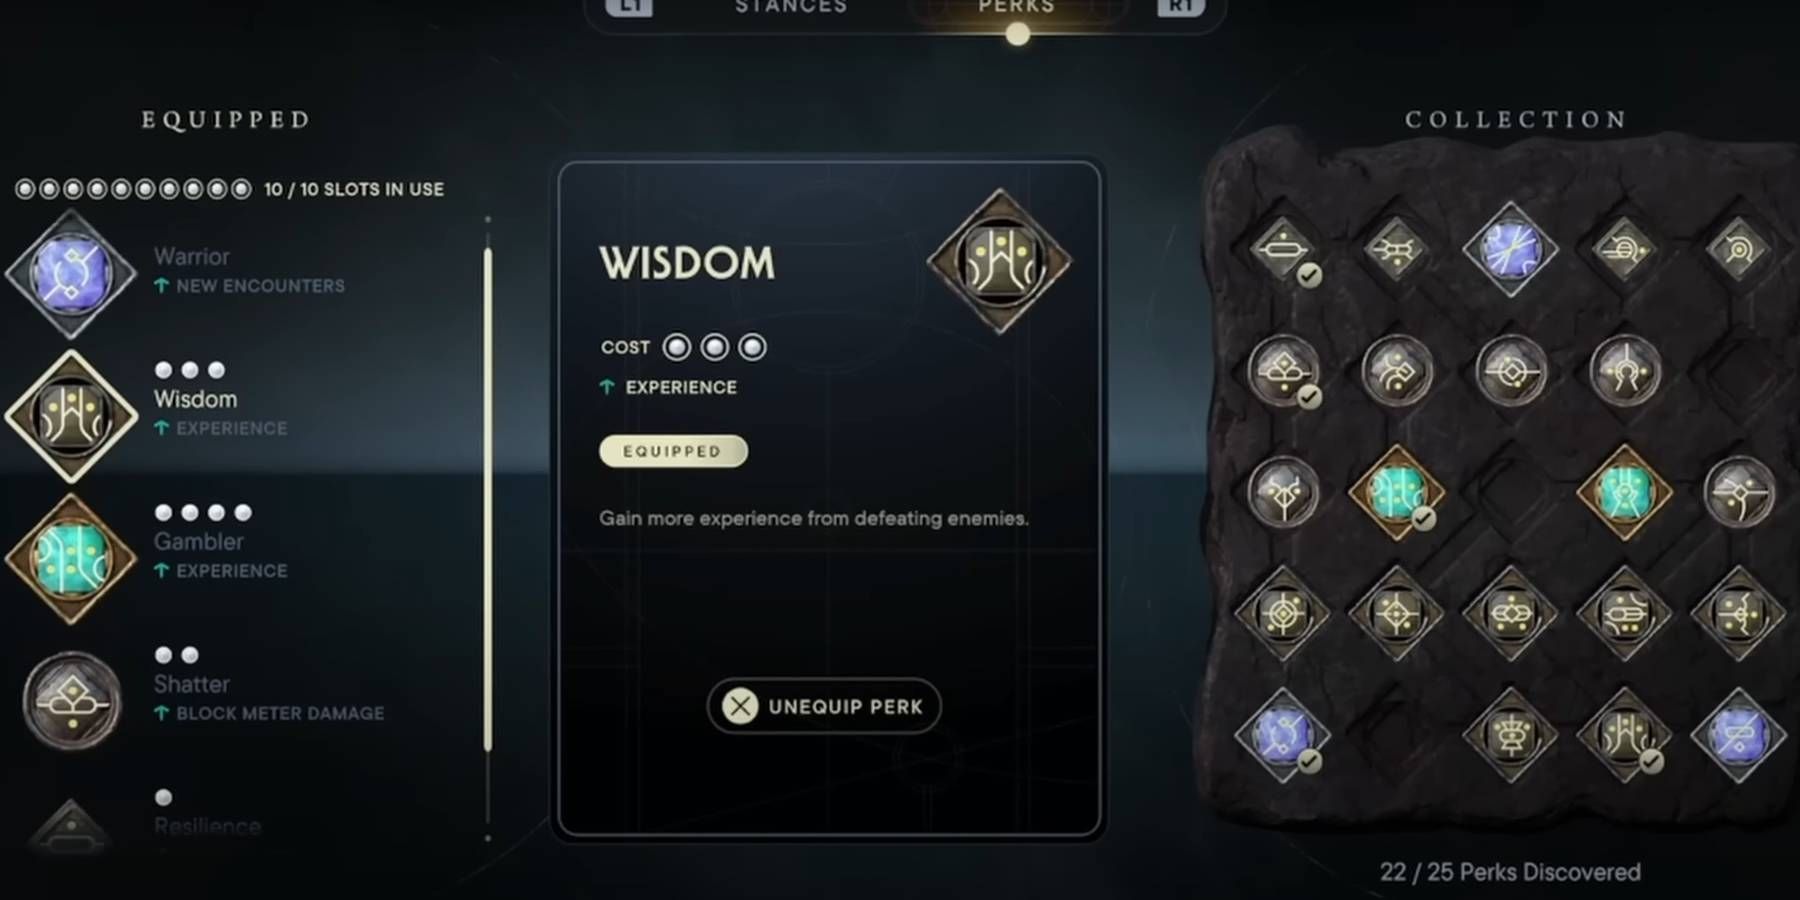 Star Wars Jedi: Survivor Wisdom Perk Included in Player's Overall Collection